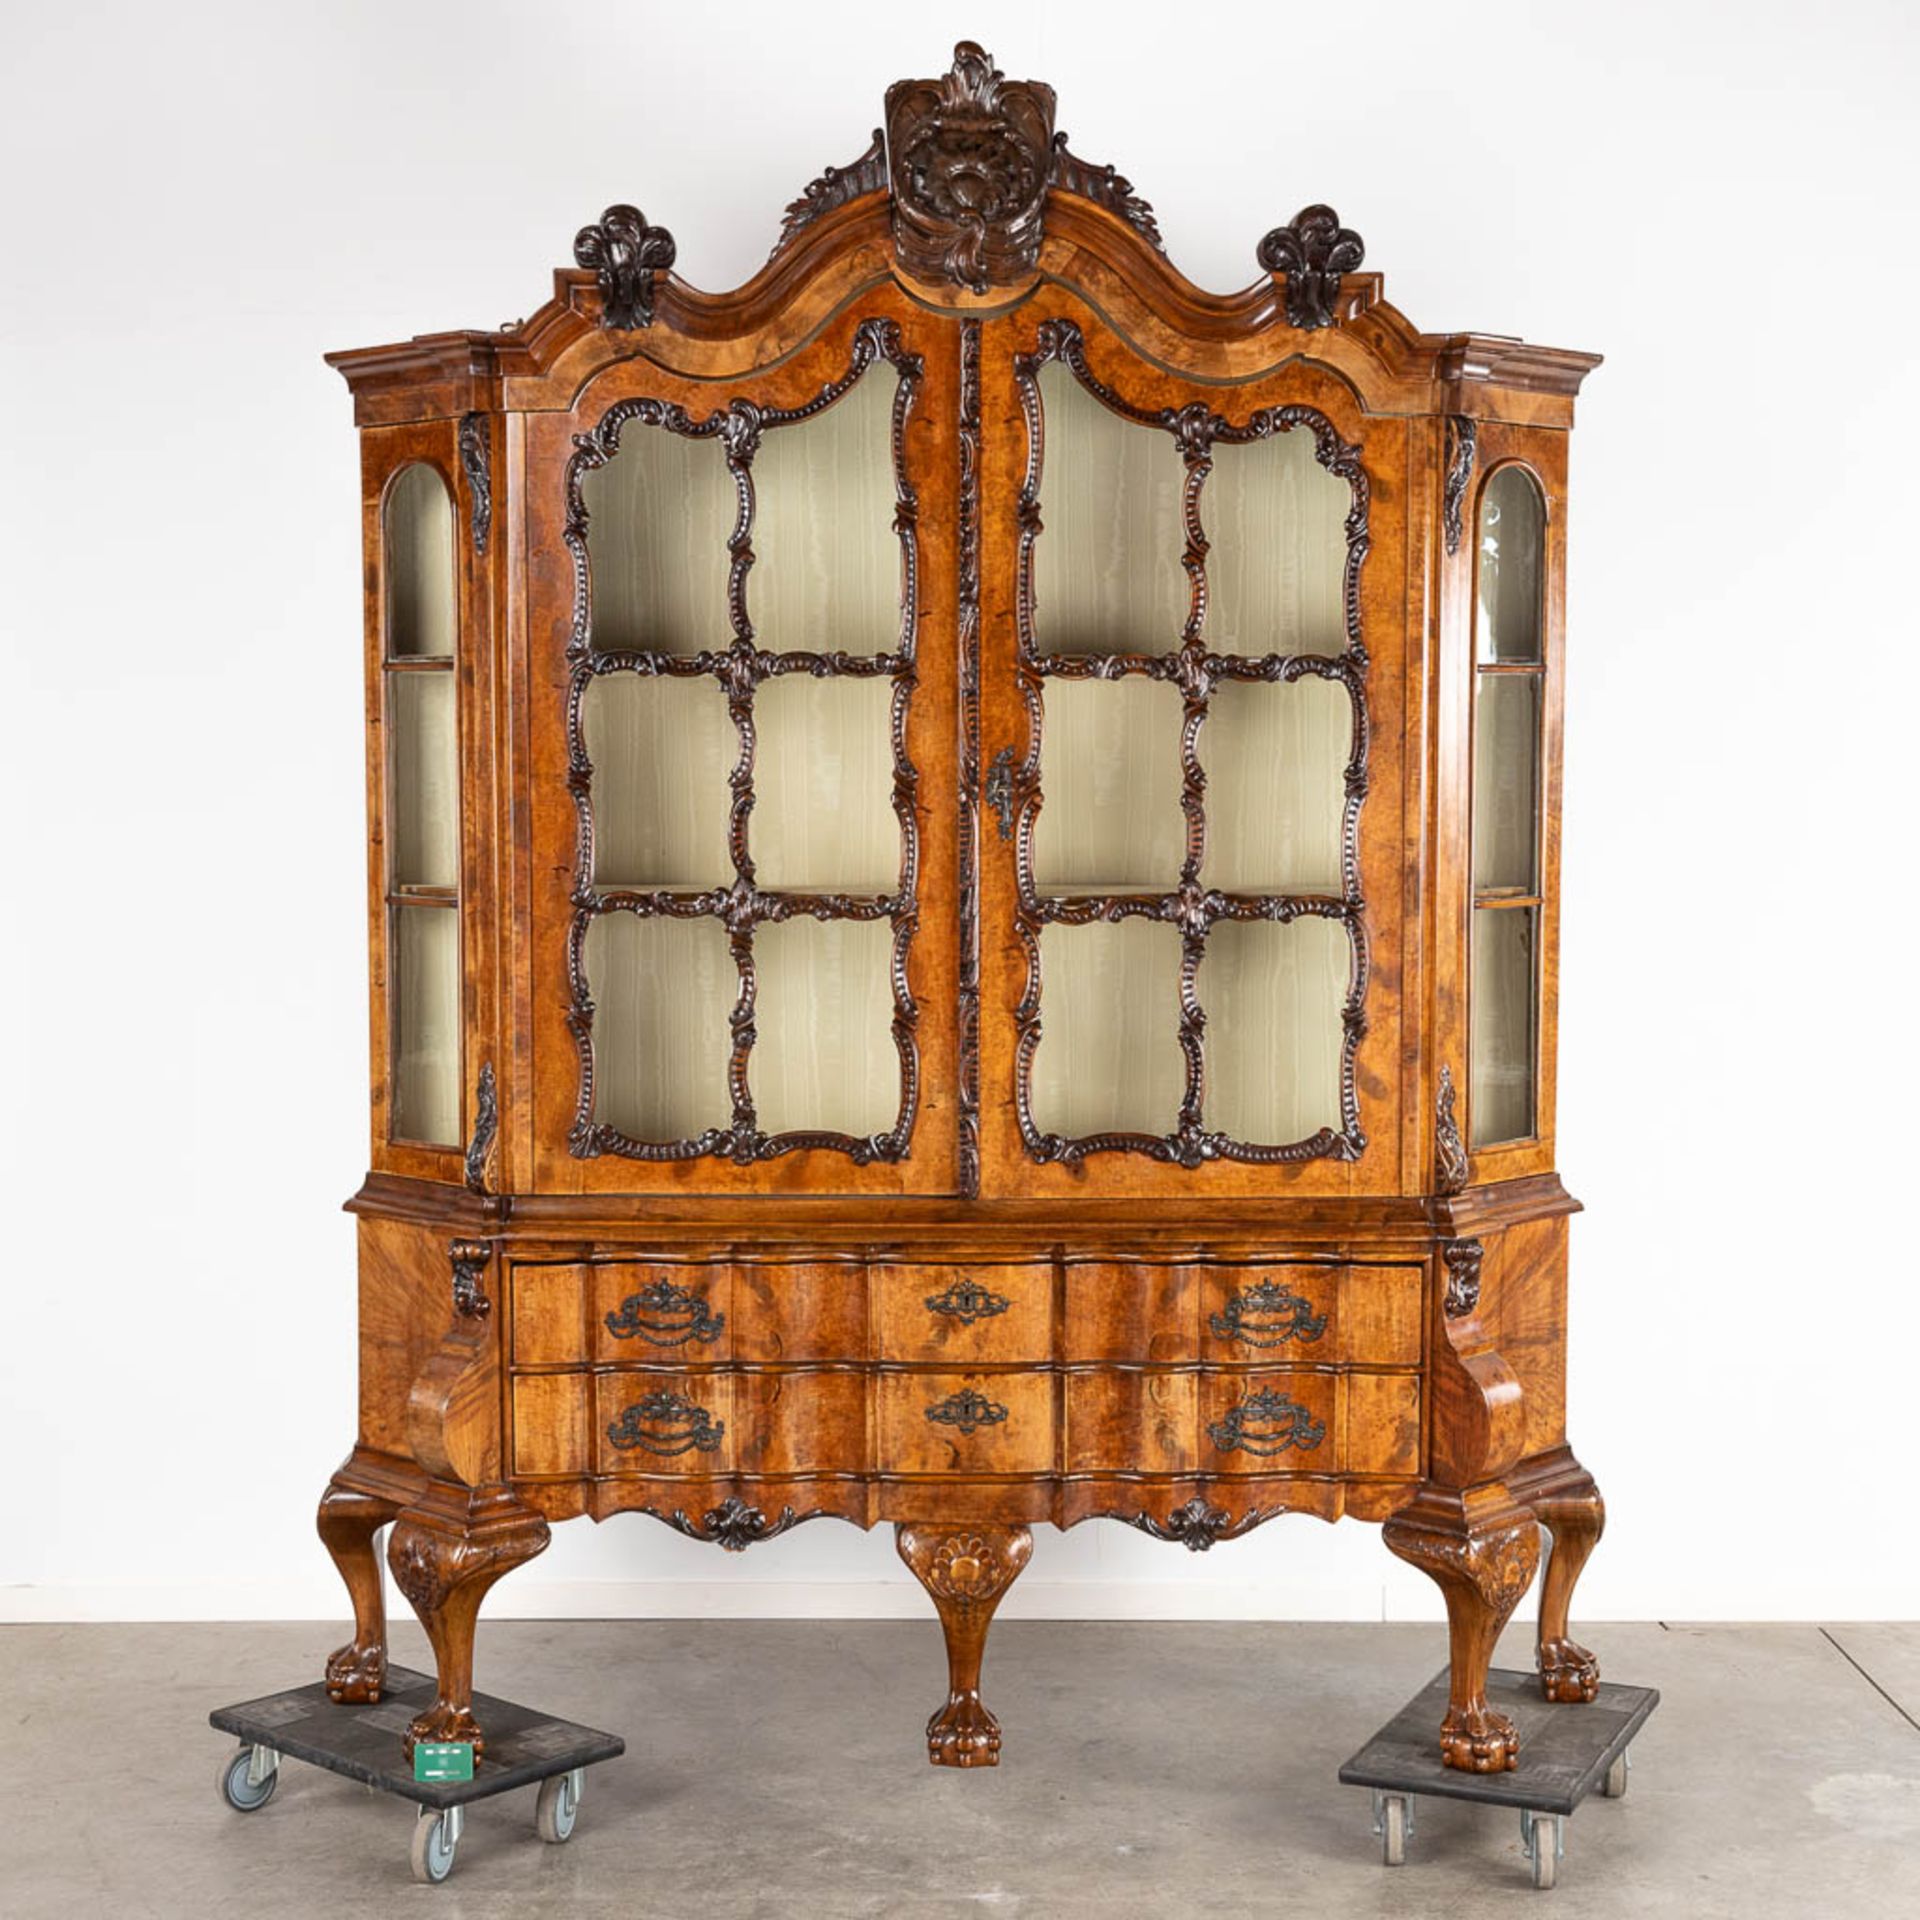 A large display cabinet, England, Chippendale style. 19th C. (D:53 x W:208 x H:252 cm) - Image 2 of 20